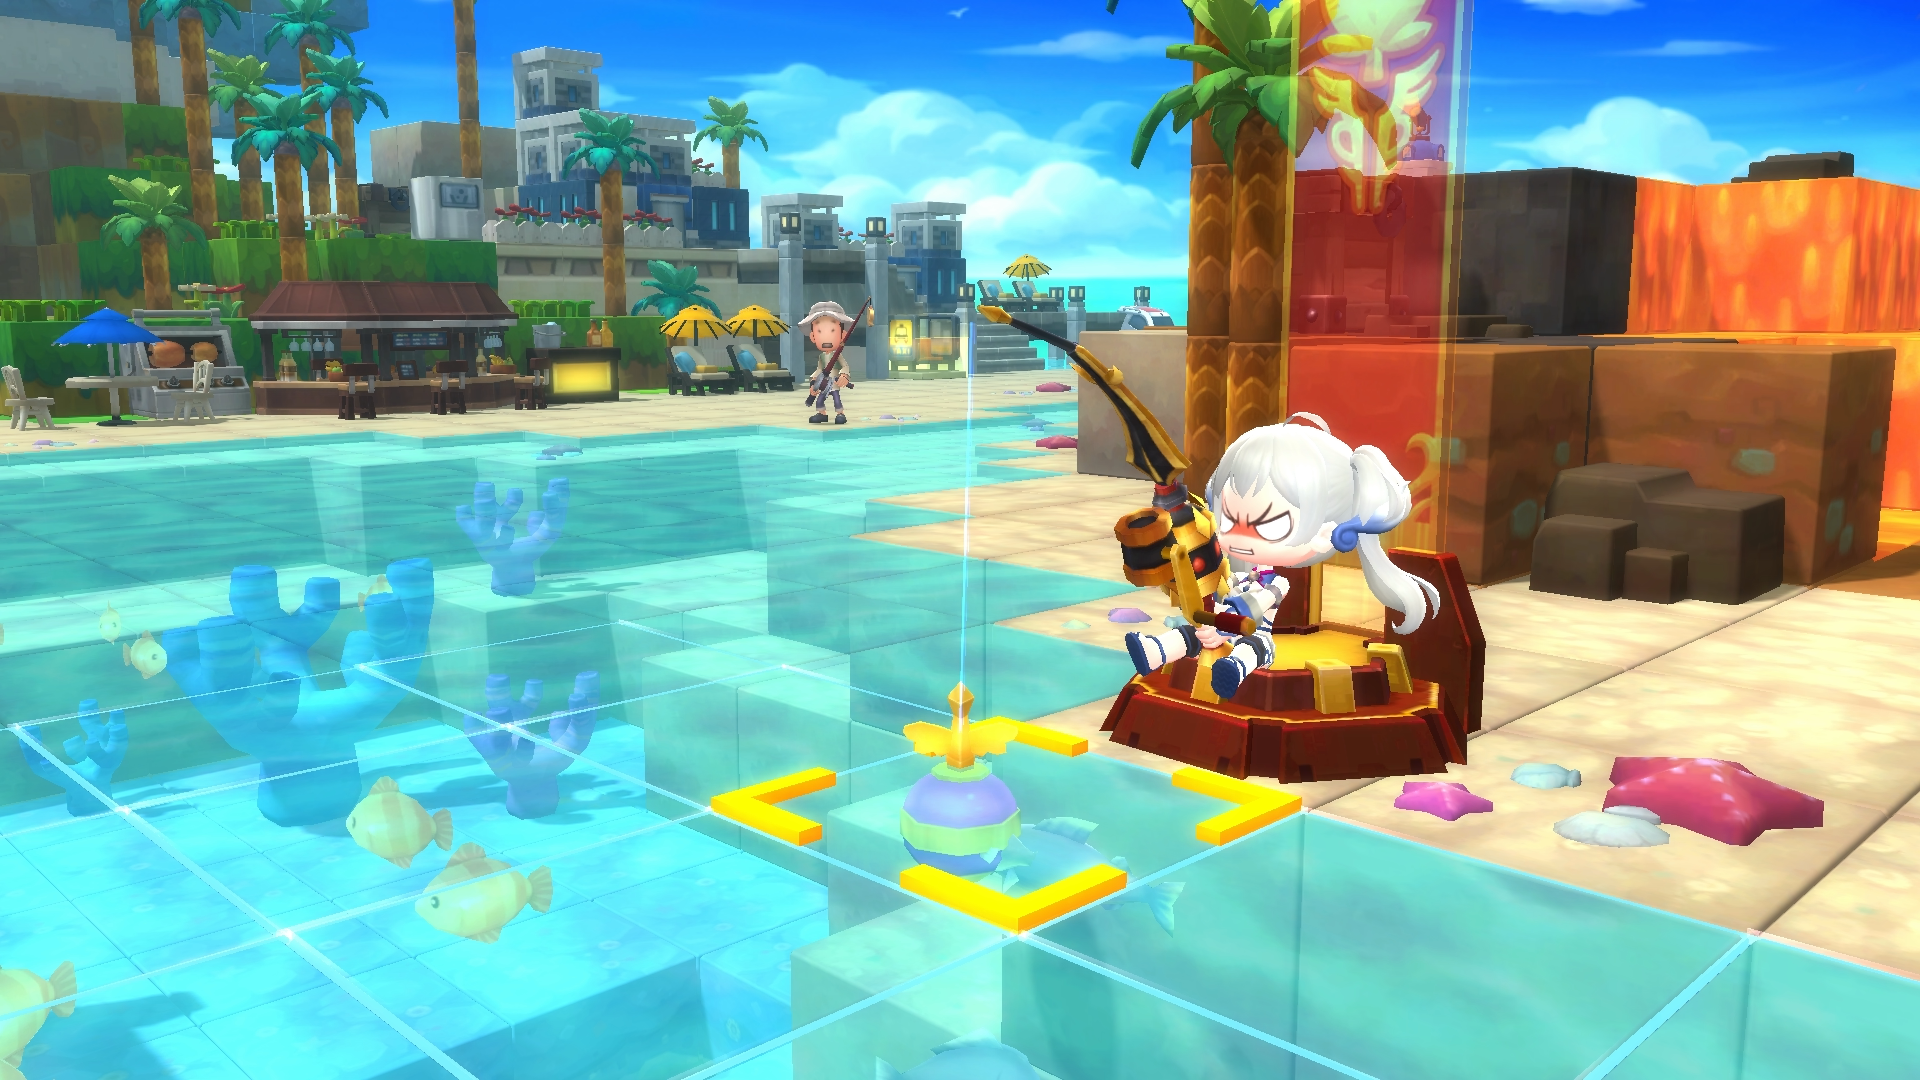 MapleStory 2 Massive Update Introduces Soul Binder Class + More